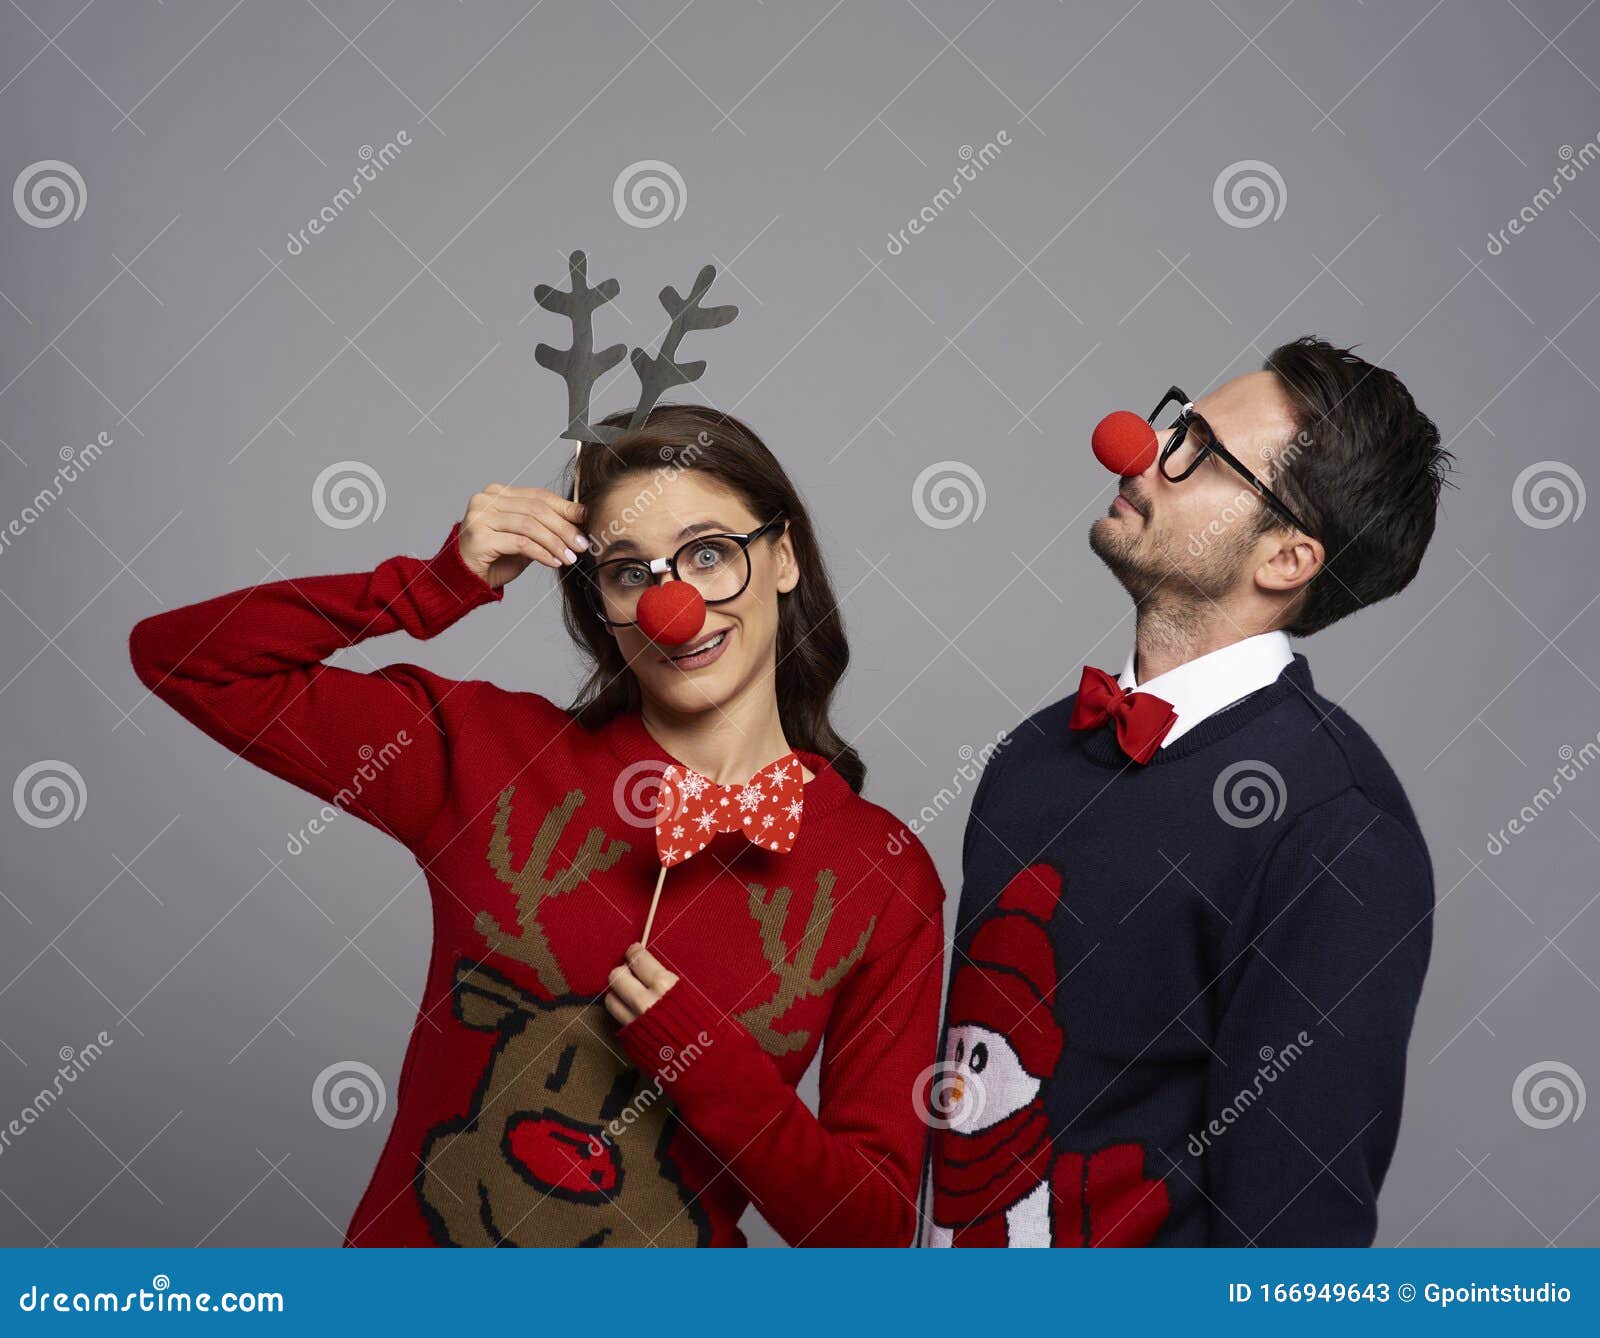 Playful Couple in Christmas Time Stock Image - Image of look, couple ...